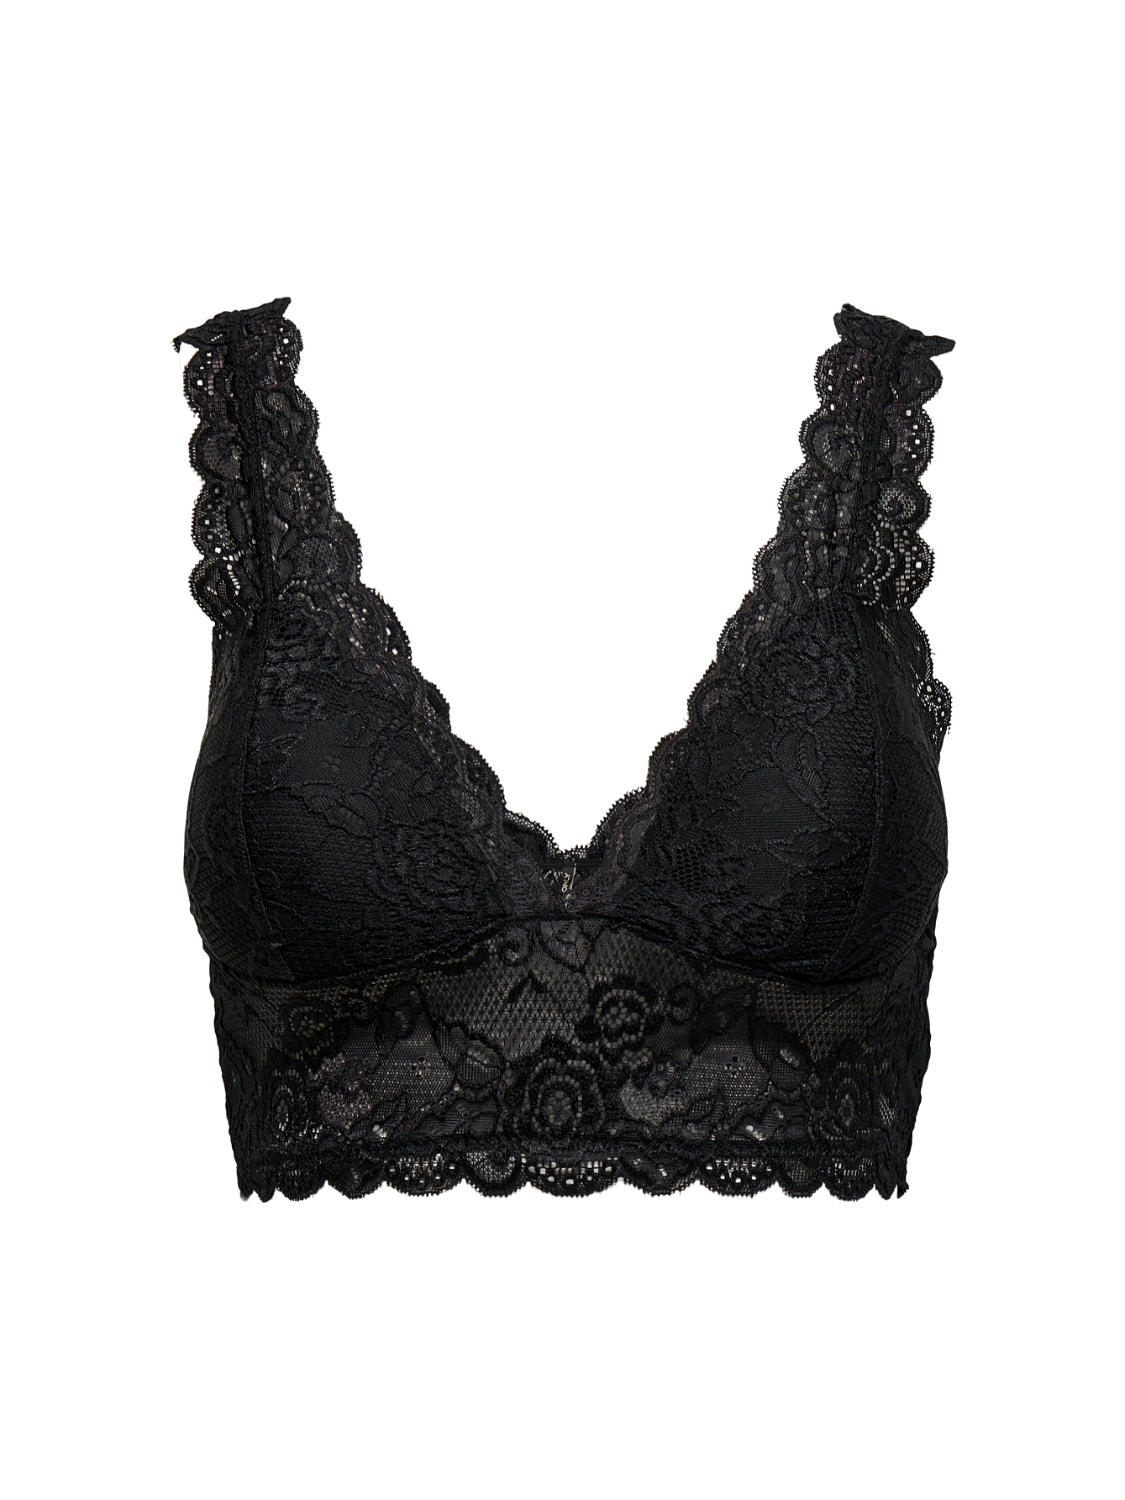 Pastunette Vintage Black Lace Bra Size 75B/34B See Through Lace Bralette  Womens Lingerie Black Sheer Bra Non Wired Non Padded Soft Satin Bra -   Norway